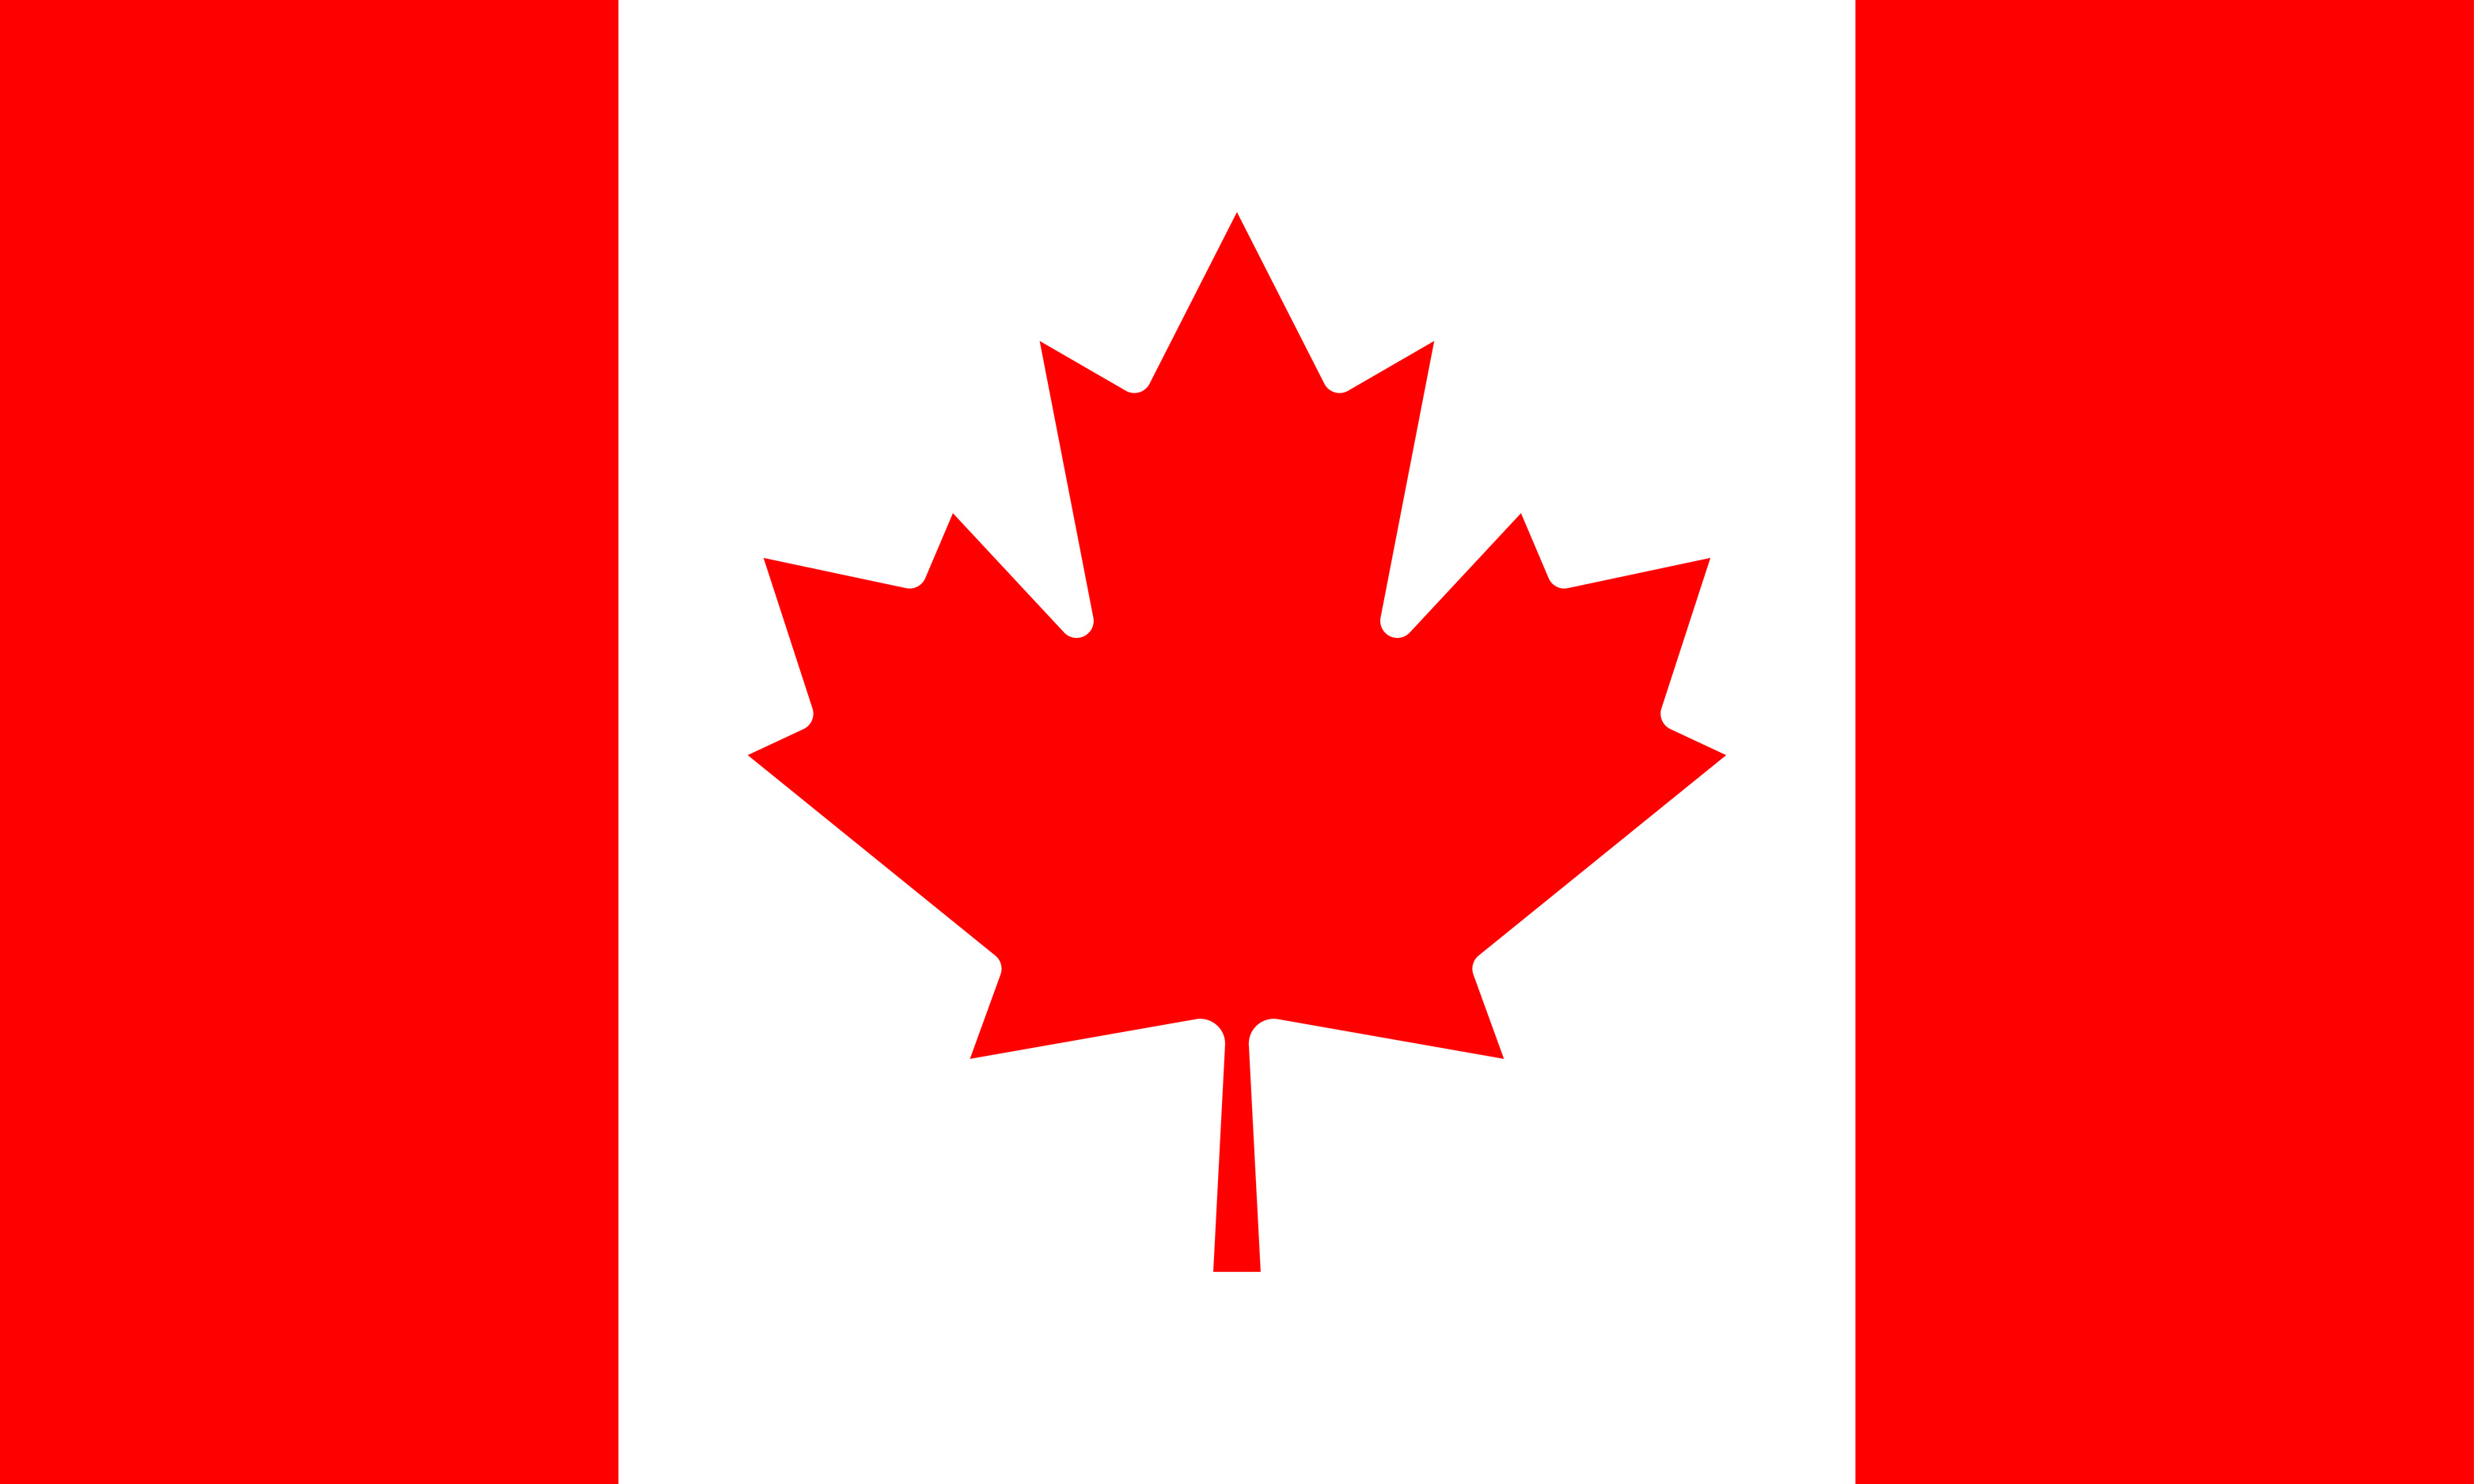 Illustration of the Canada Flag